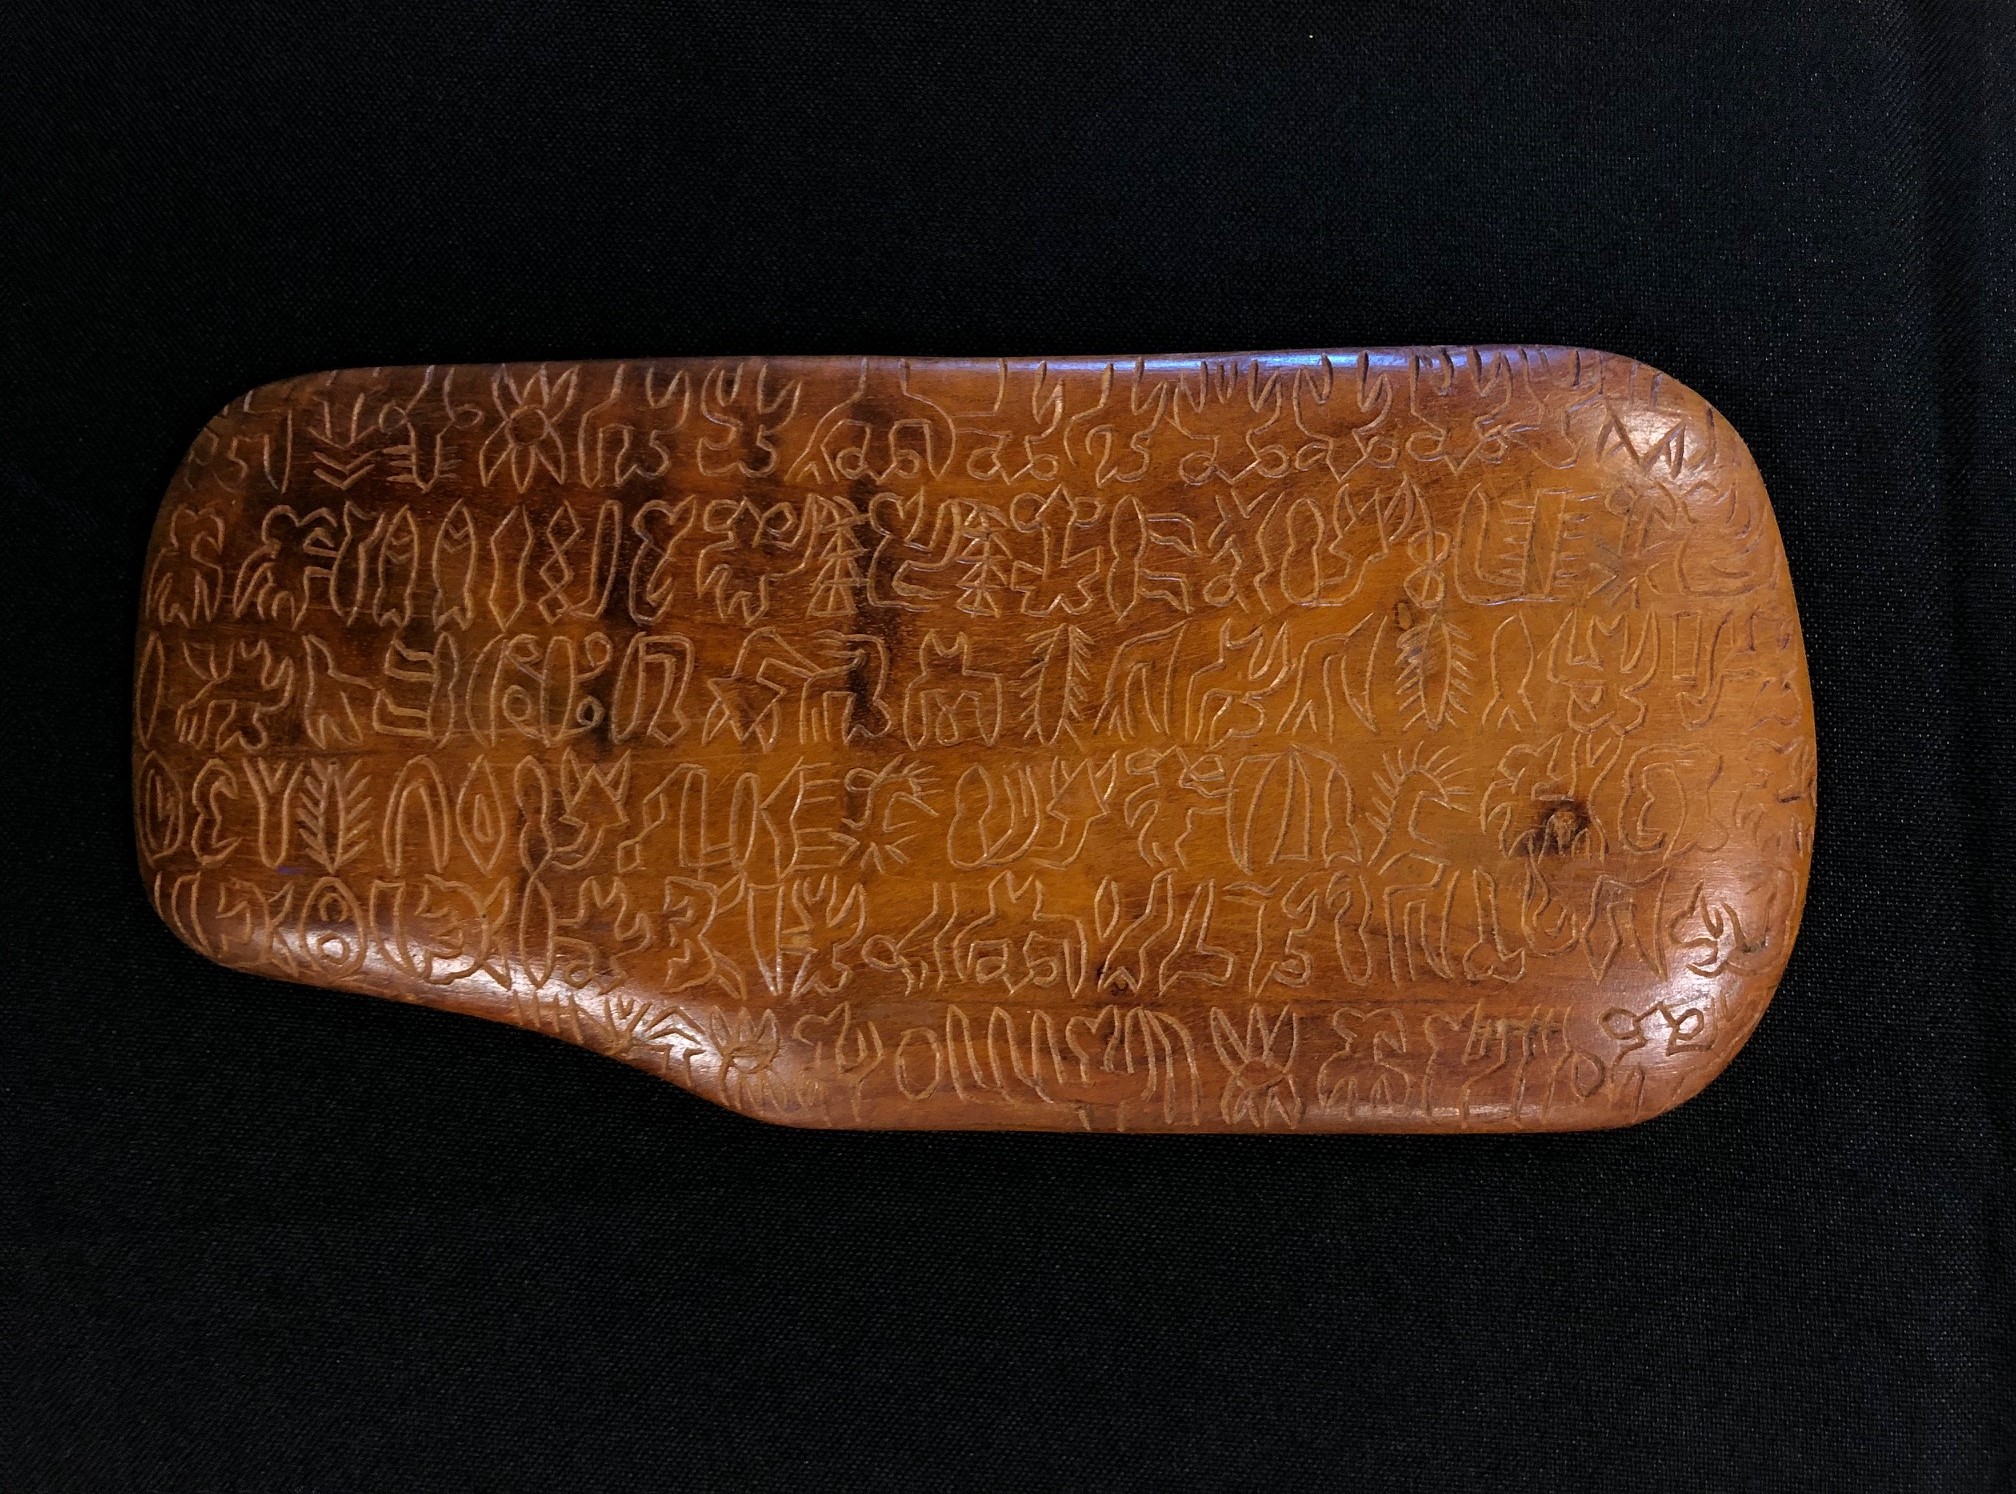 Carved Chief's Gorget, "Rei Miro" and Carved Board - Image 4 of 5